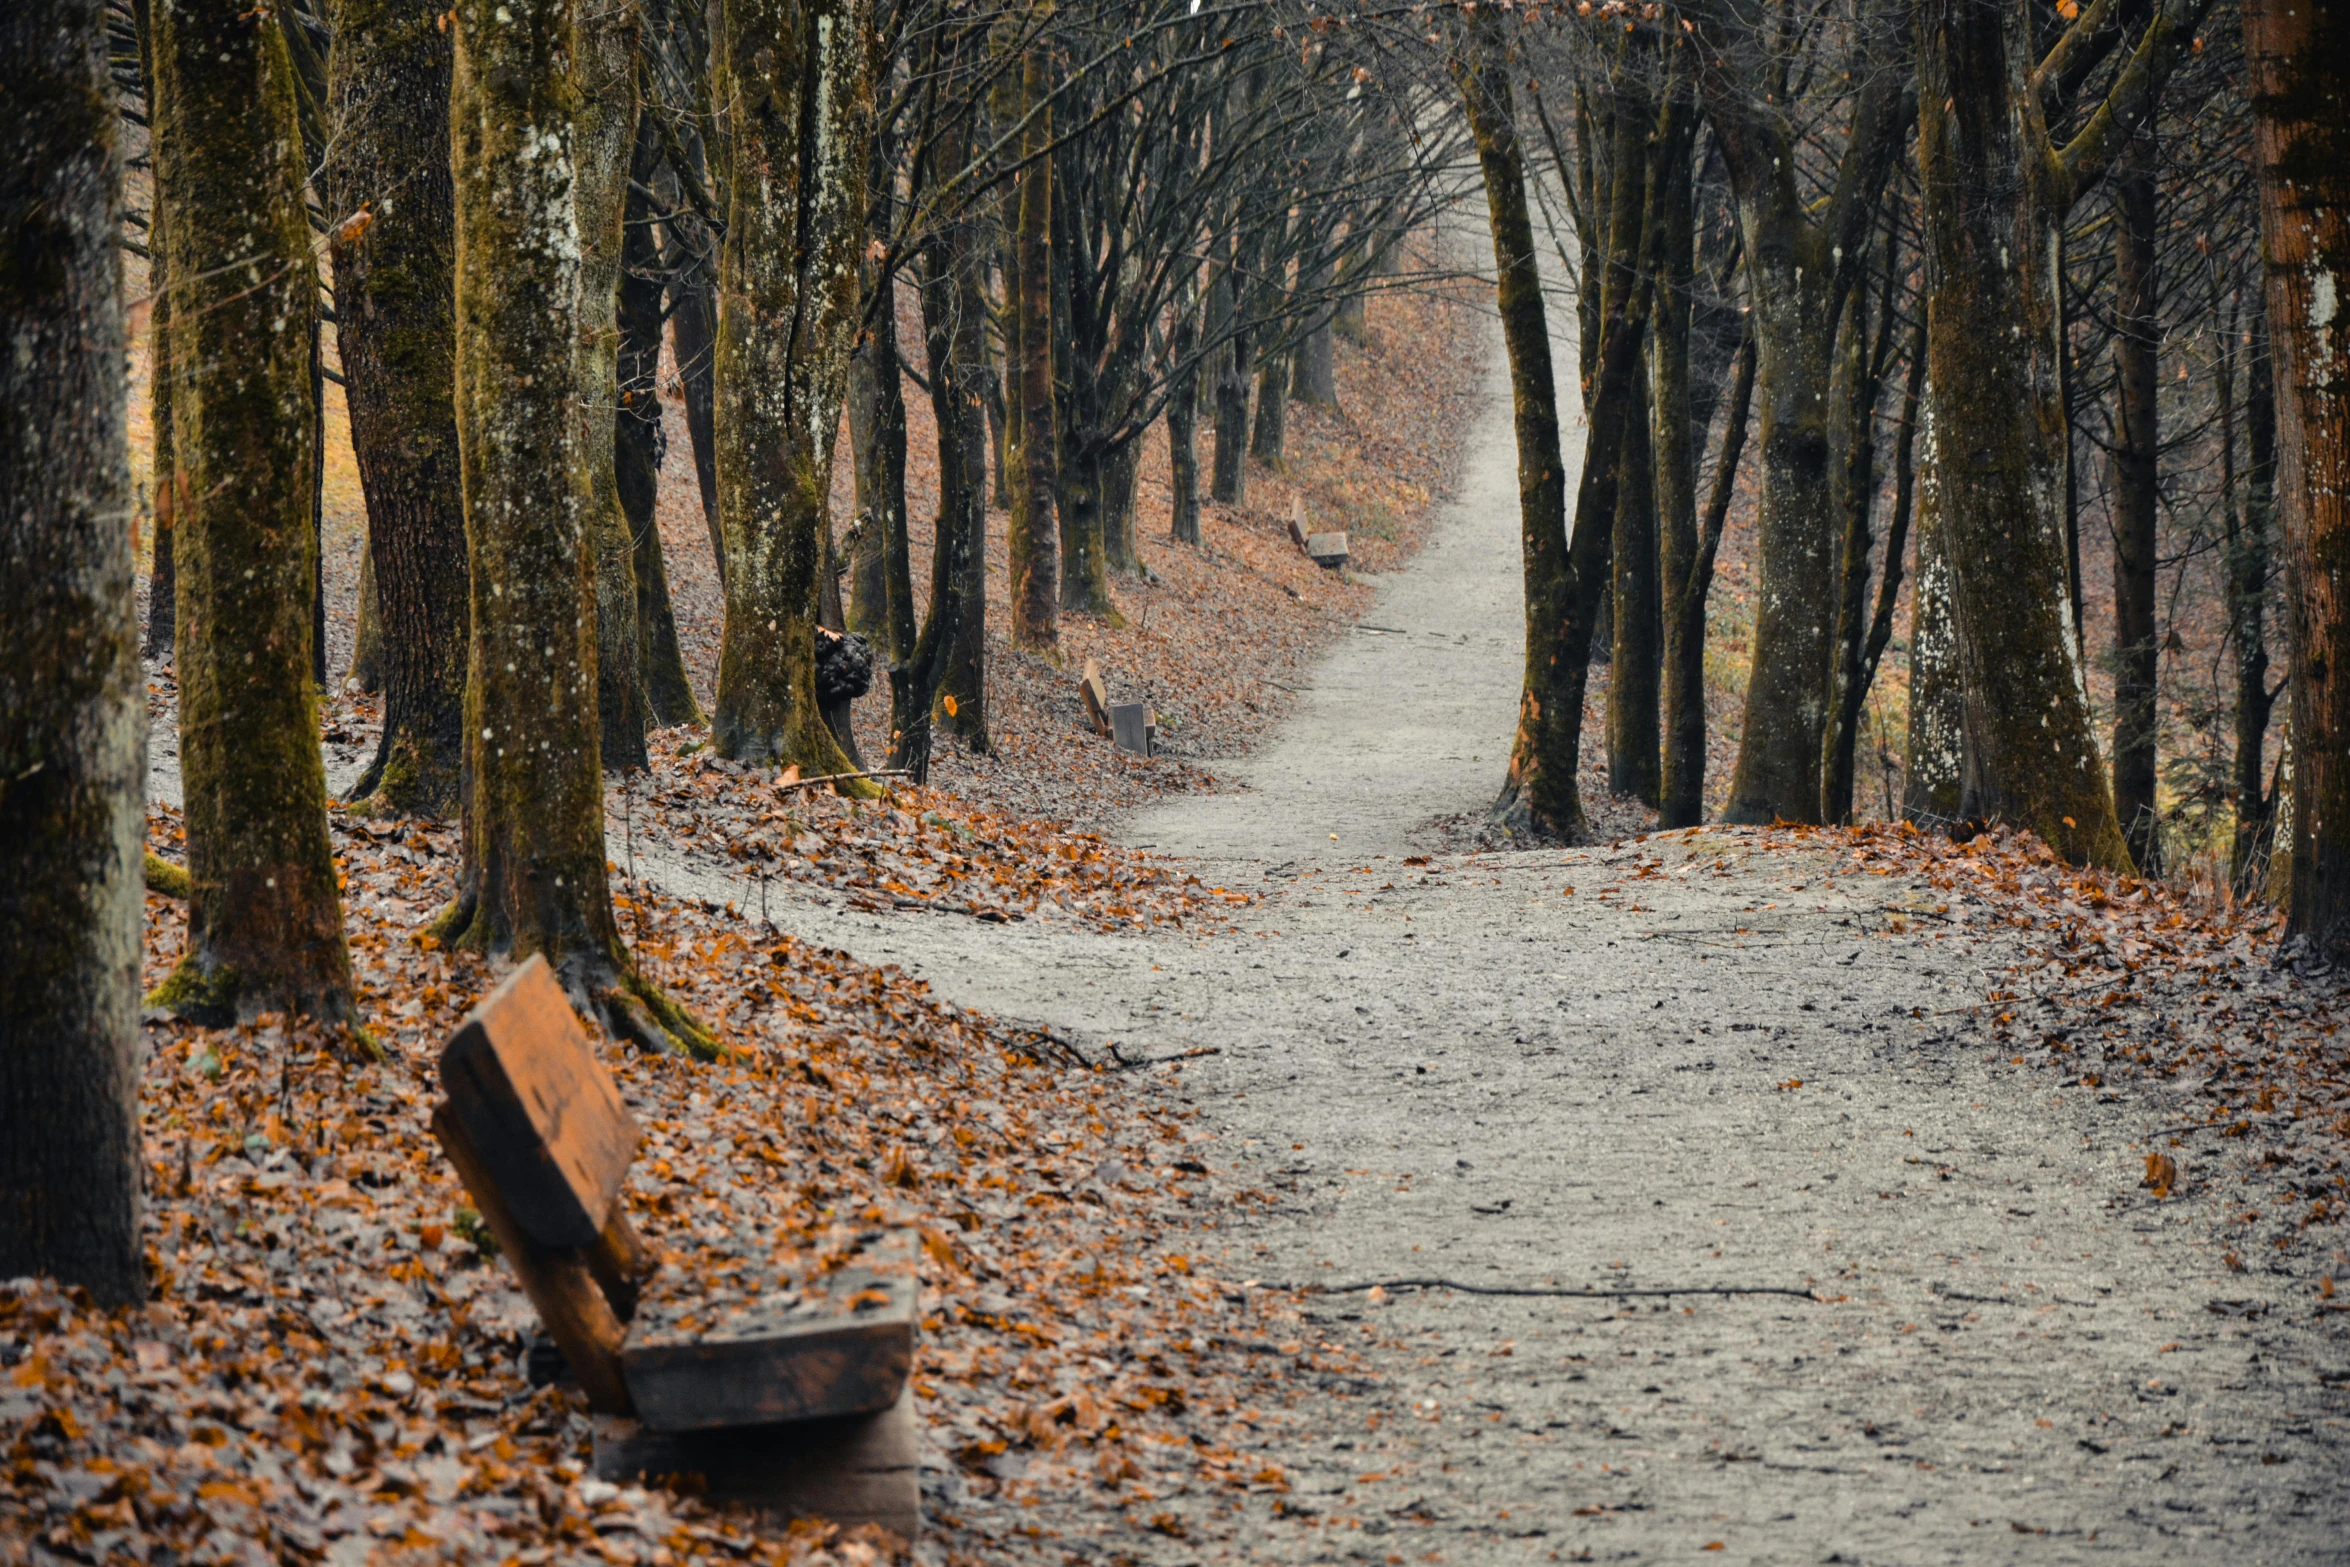 a bench sitting in the middle of a leaf covered path